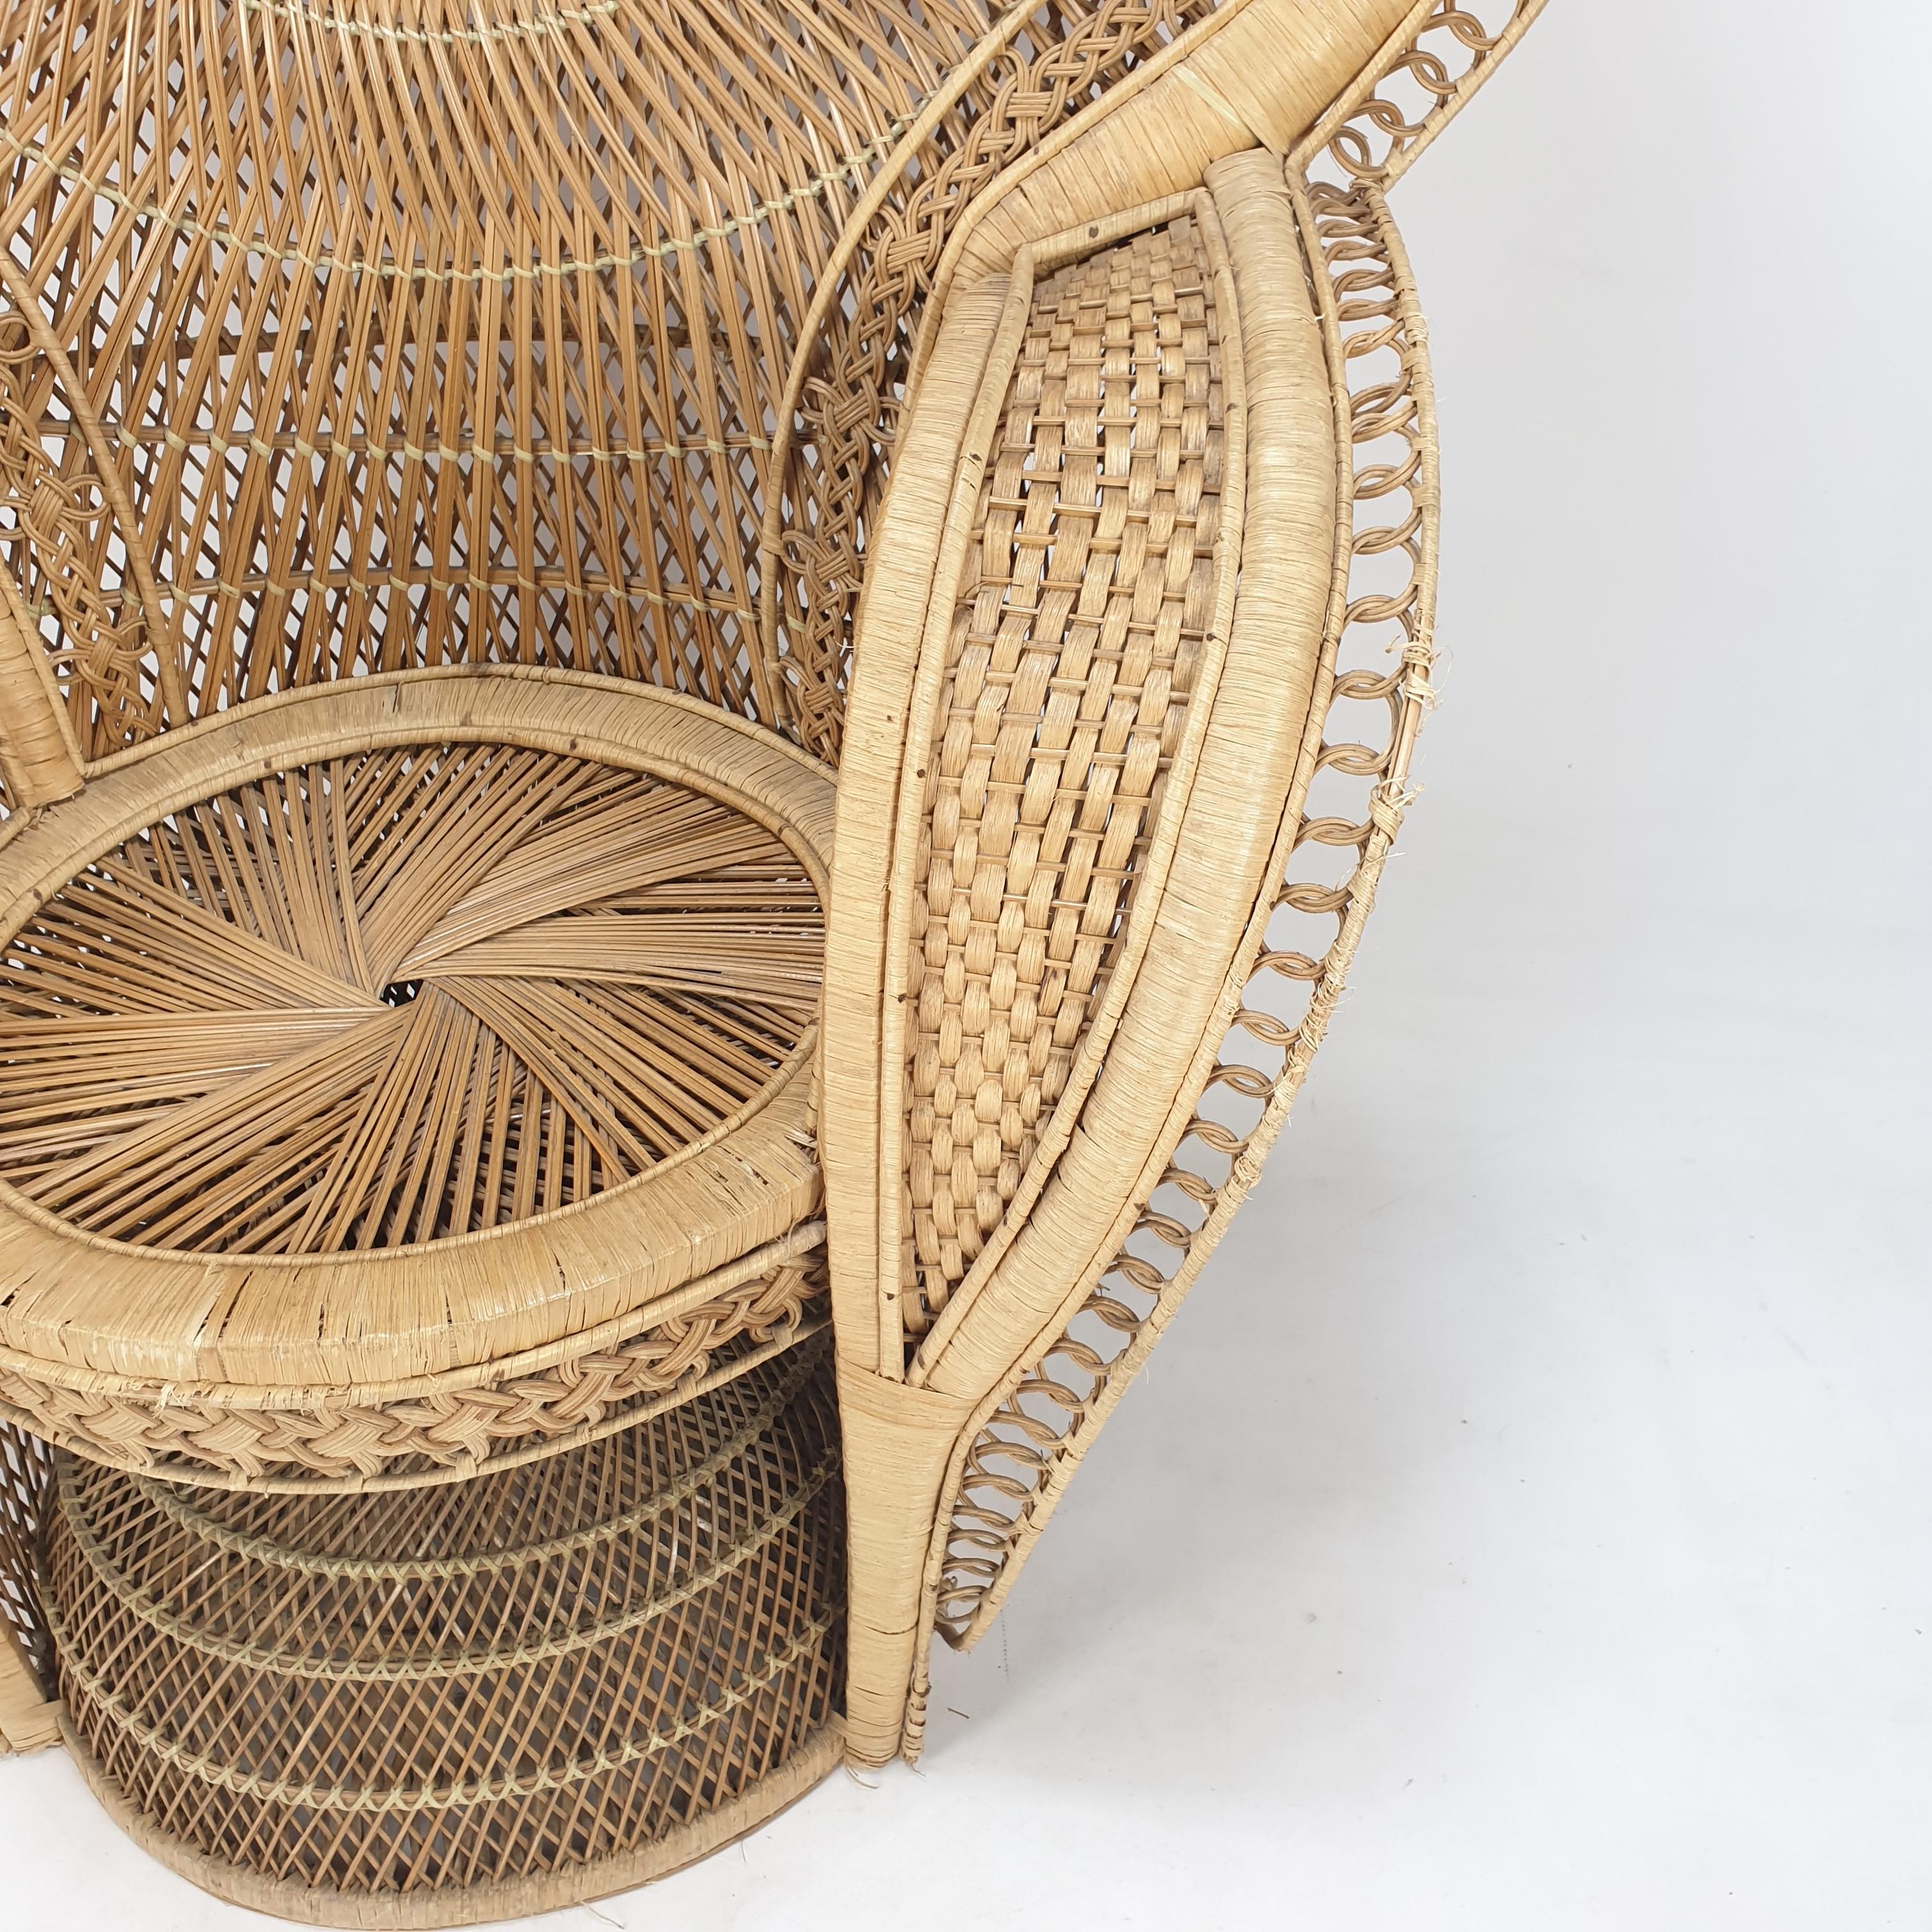 Midcentury Emmanuelle or Peacock Rattan and Wicker Chair, Italy 1960s For Sale 4